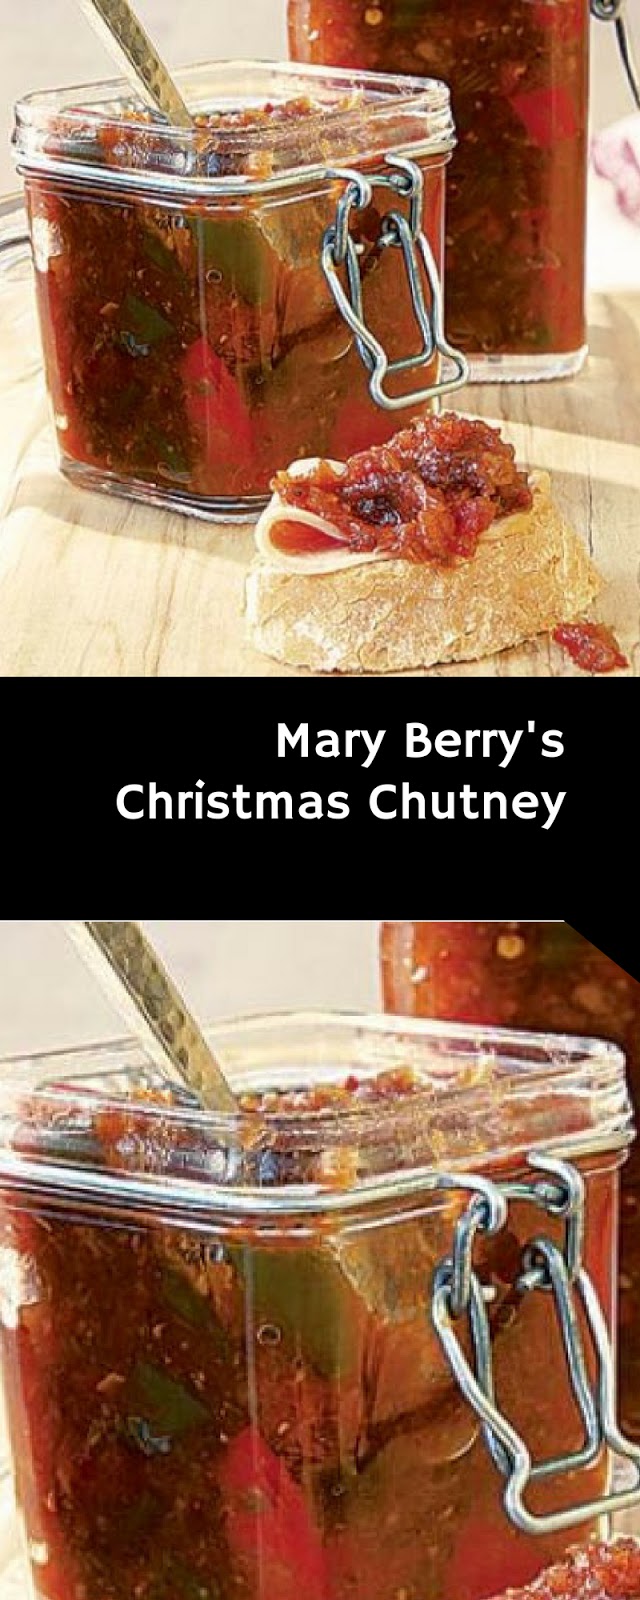 Mary Berry's Christmas Chutney #christmas #cookies | Home Delicious Recipe